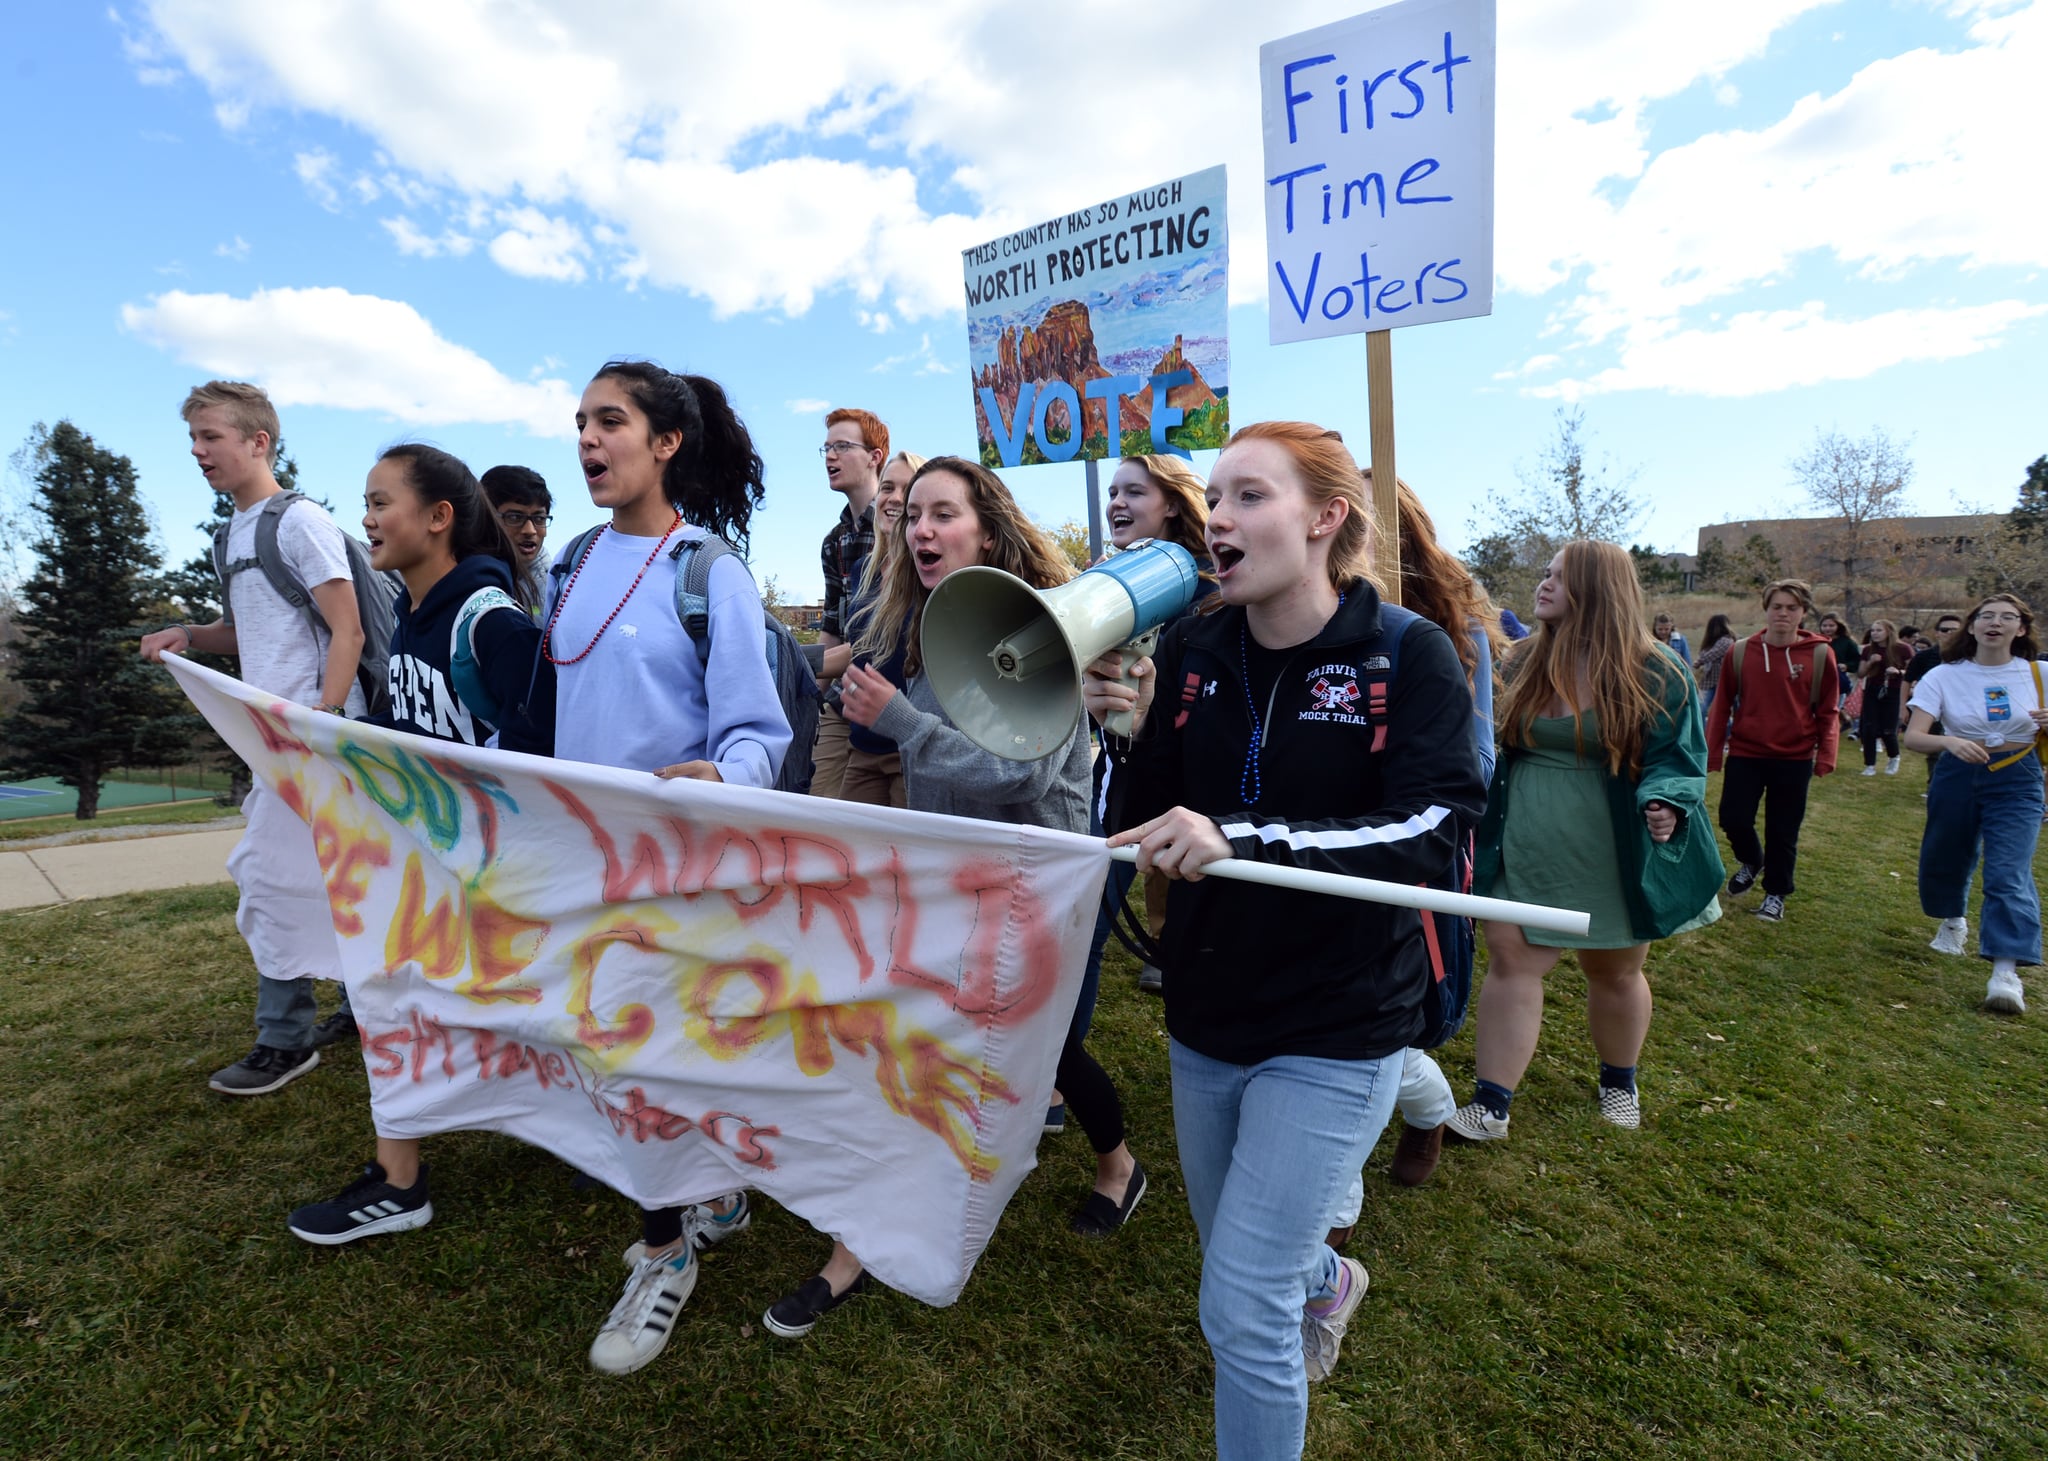 BOULDER, CO - October 25, 2018:  Owen Hushka, left, and Vanessa Haggans, hold a banner while marching, with other students and staff of Fairview High School, to the South Boulder Recreation Center to vote and turn in election ballots in early voting in Boulder, Colorado on Thursday October 25, 2018. 